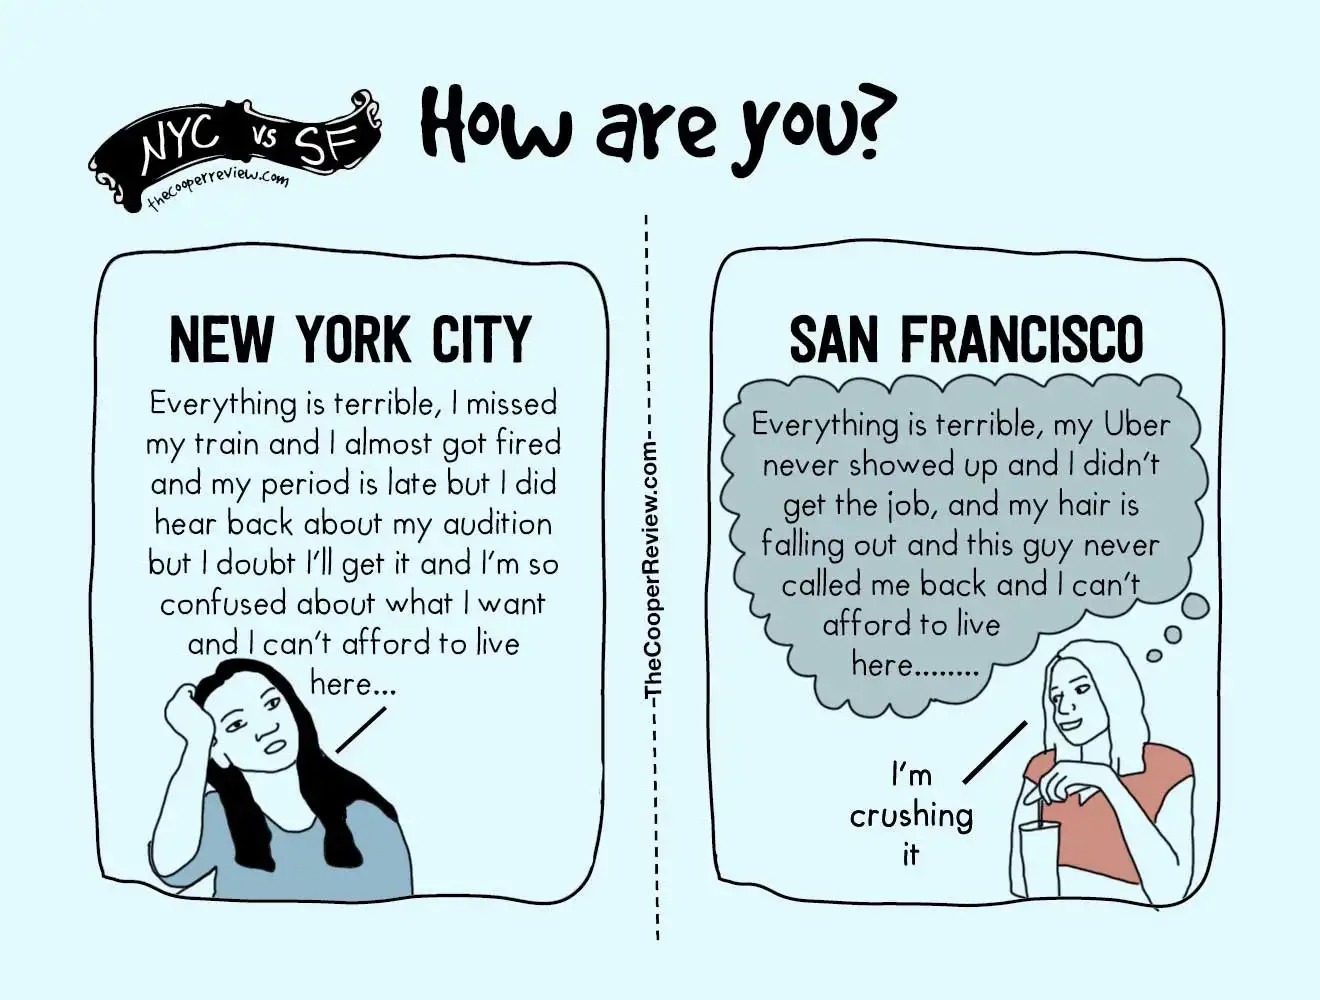 NYC vs. SF: How are you?